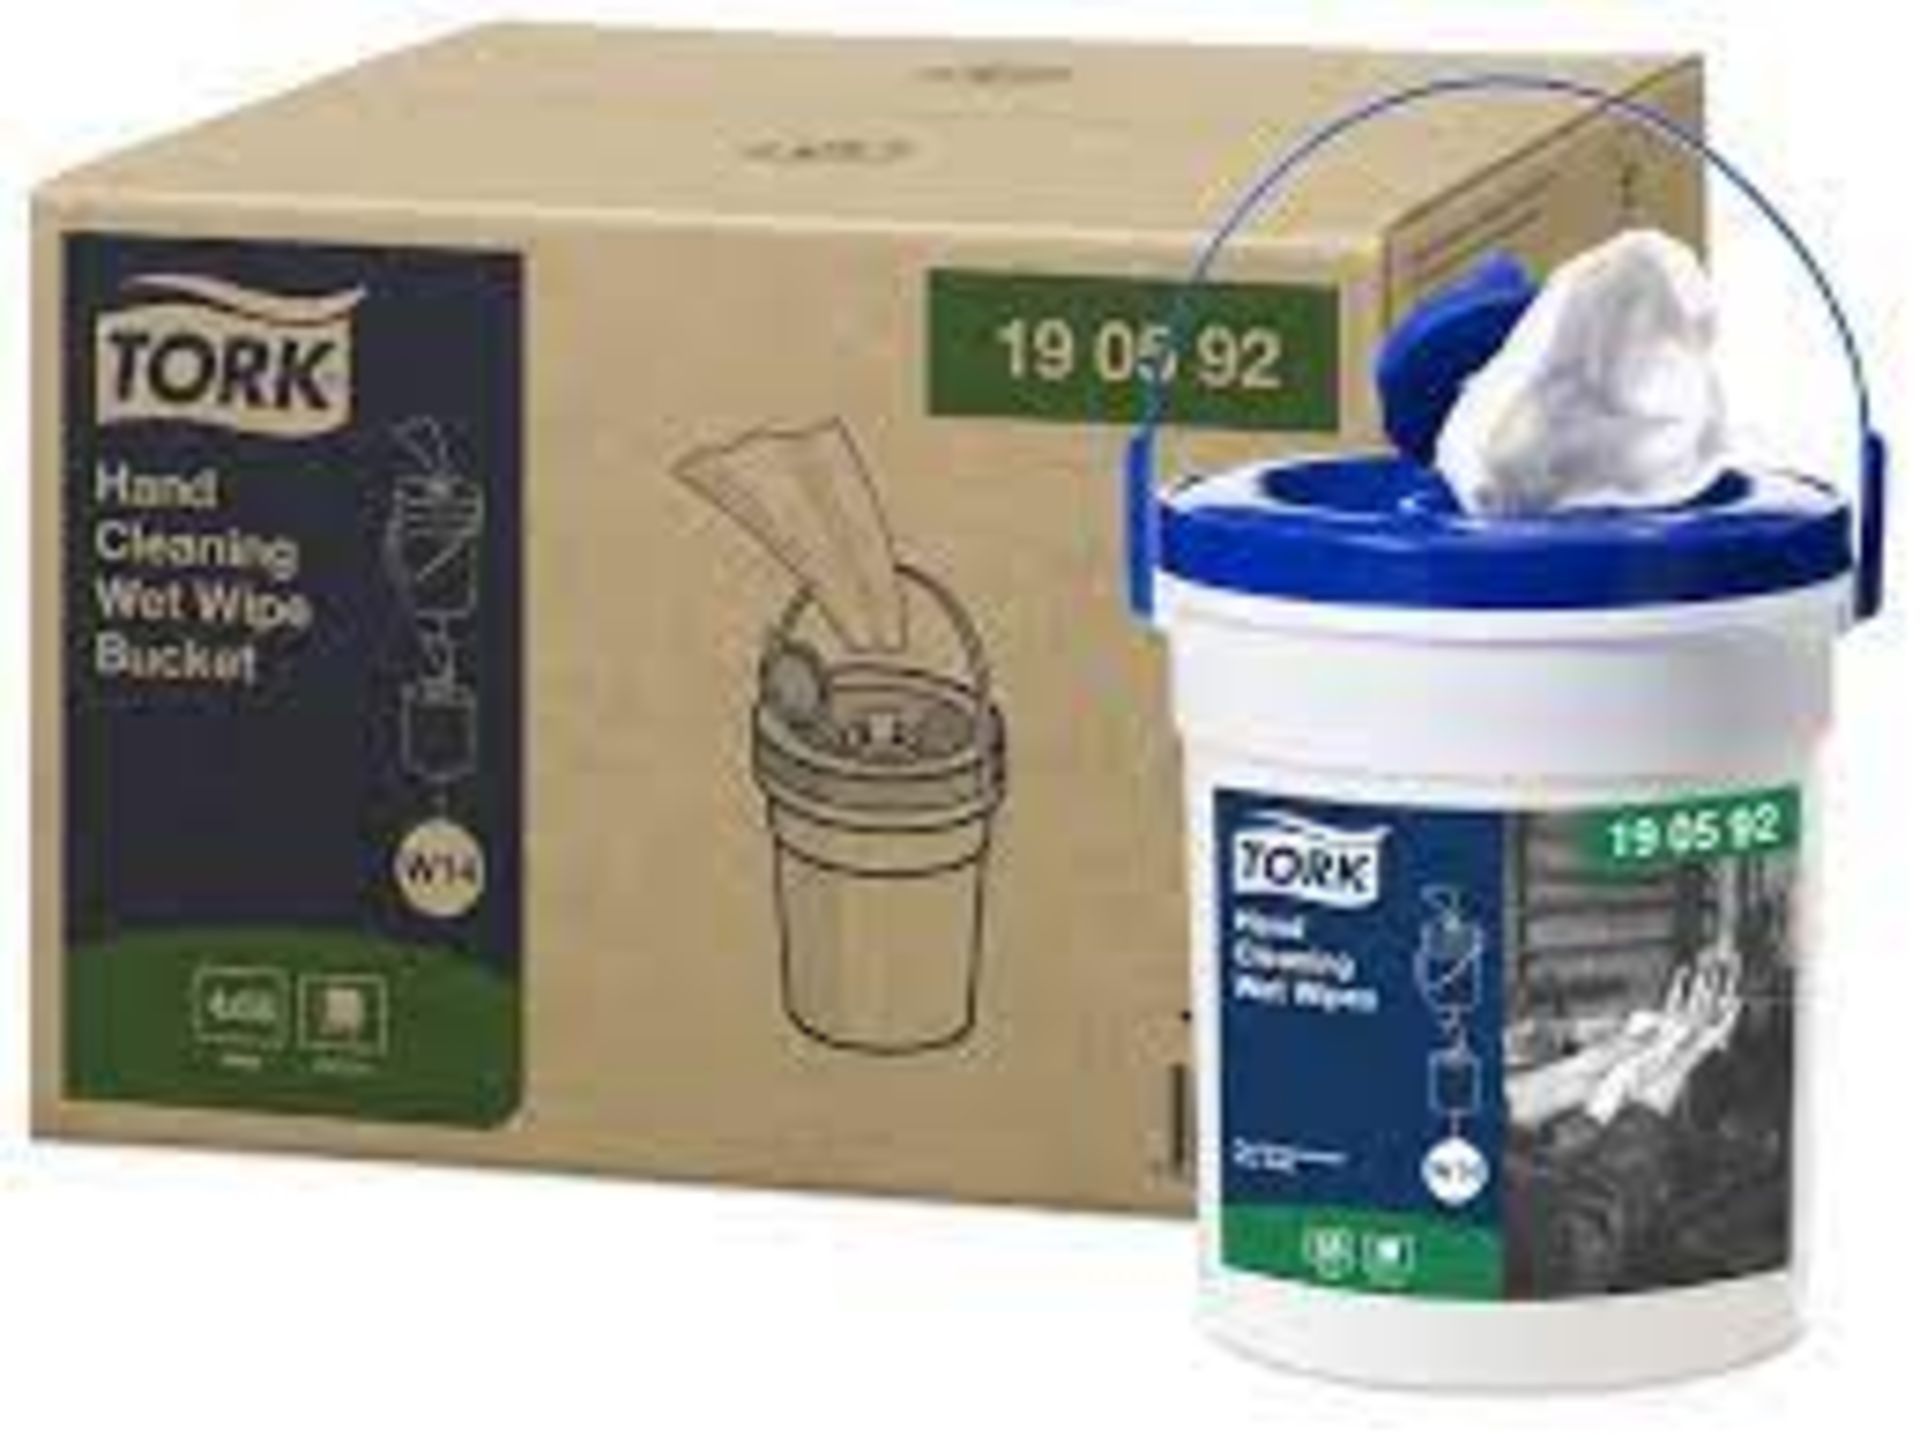 30 X TORK 58 SHEET W14 190592 HAND CLEANING WET WIPES BB SEP 23 R13.7/12.4